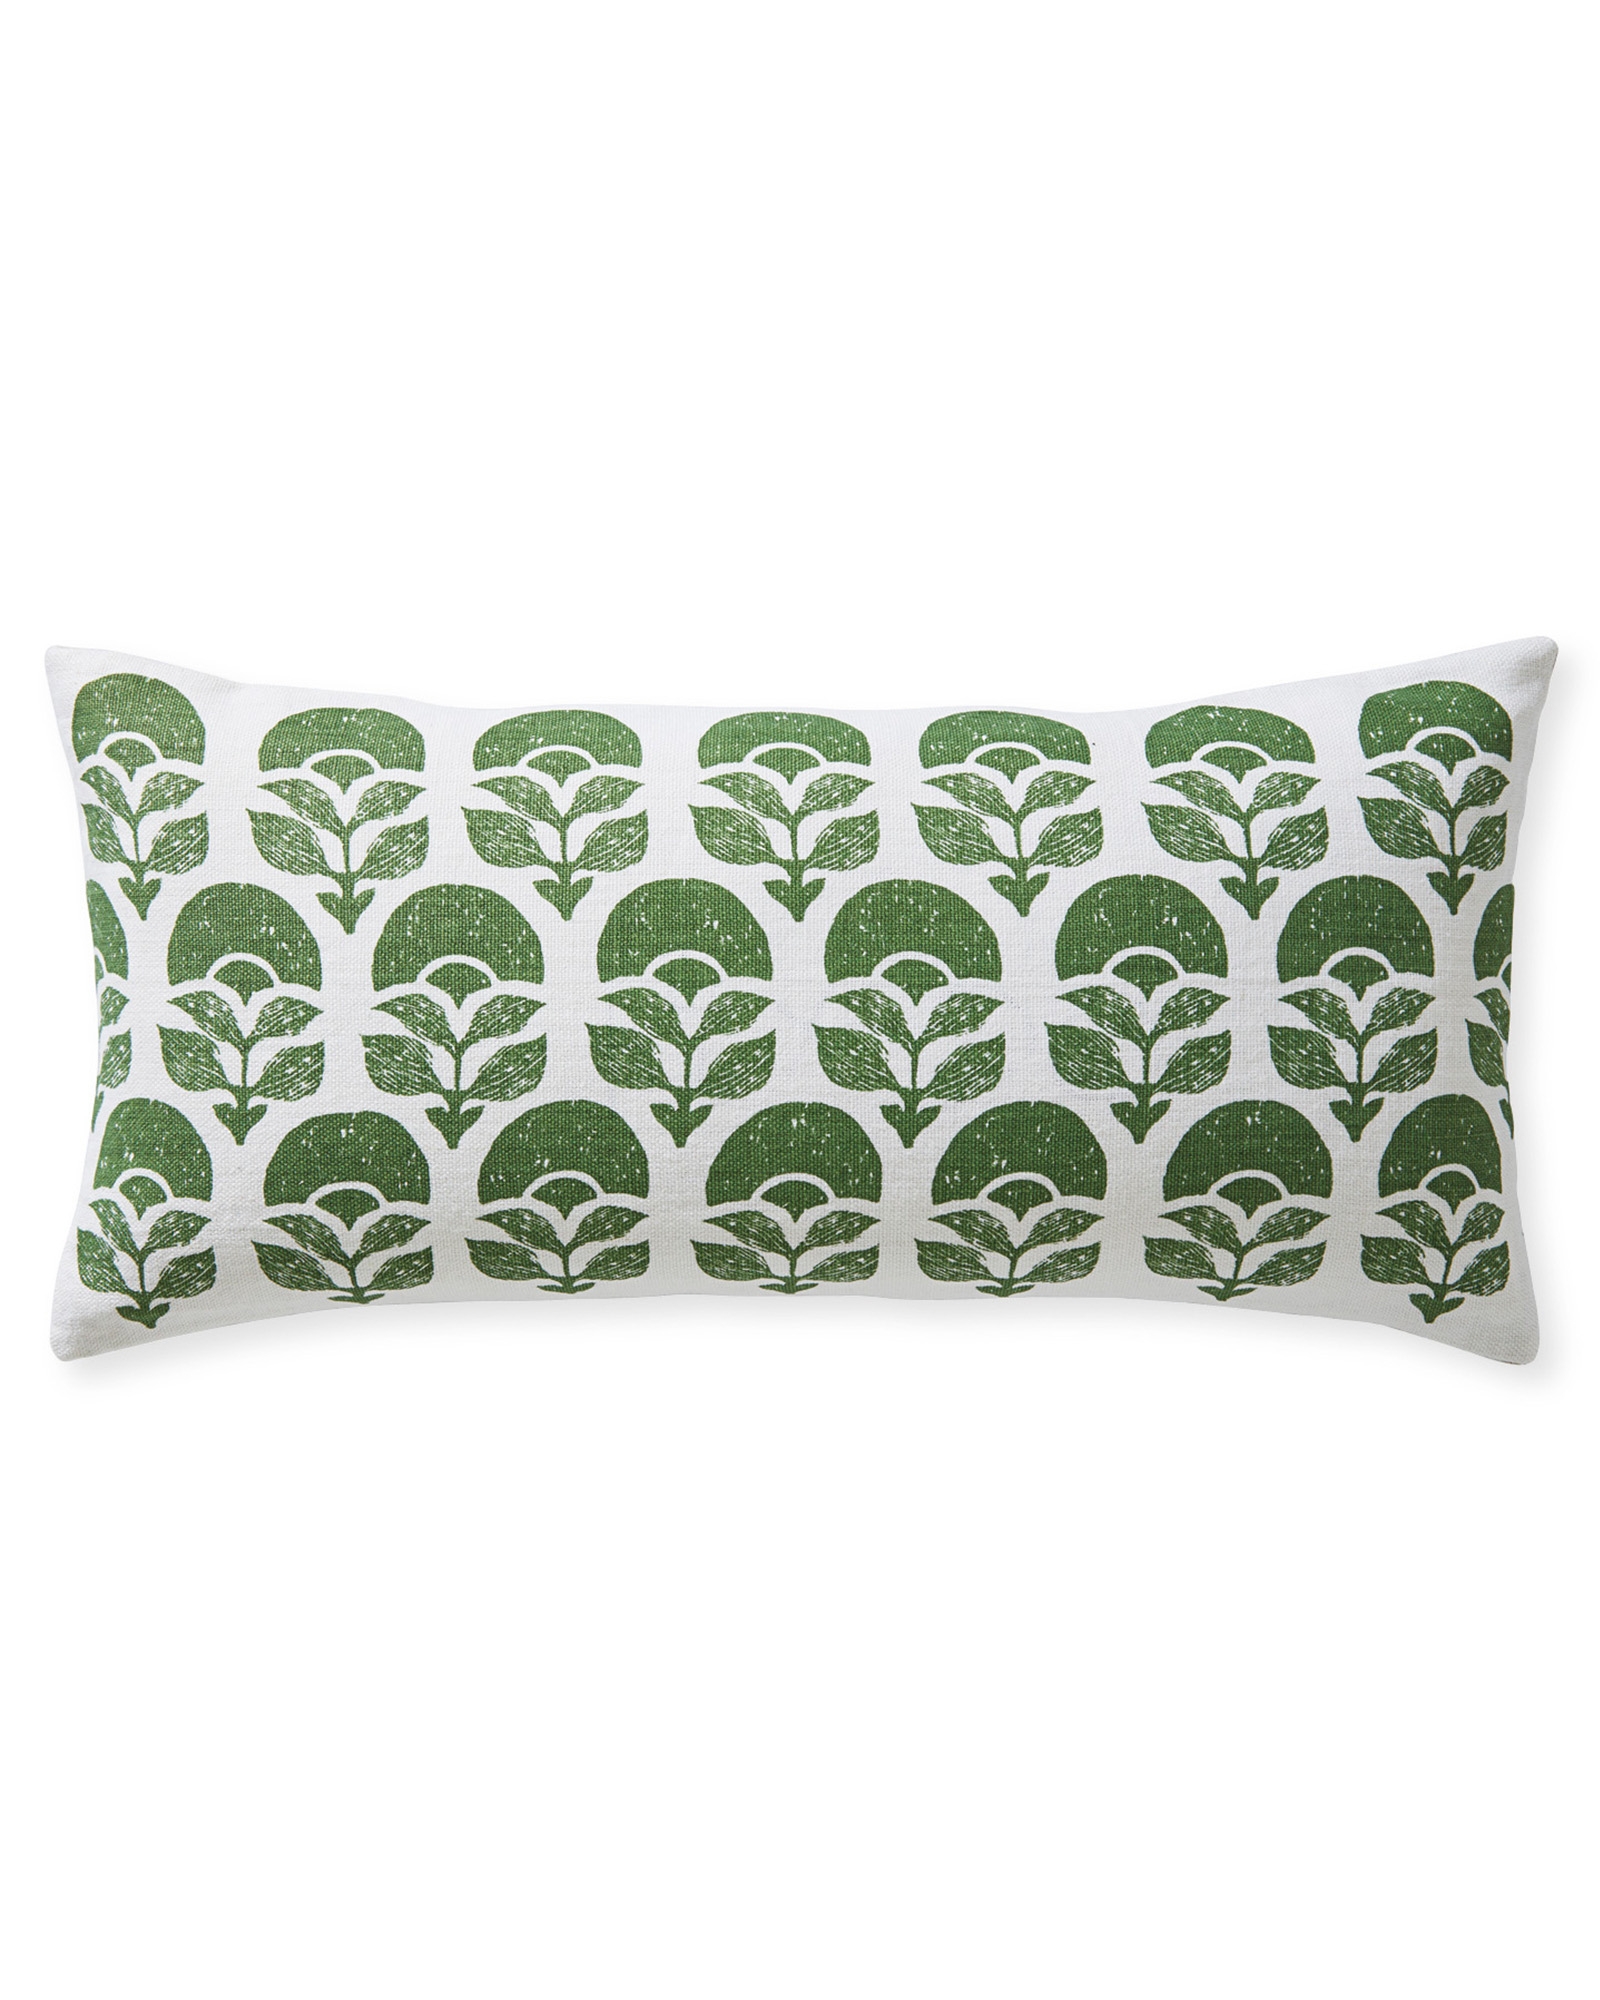 Larkspur Printed Pillow Cover - Image 0